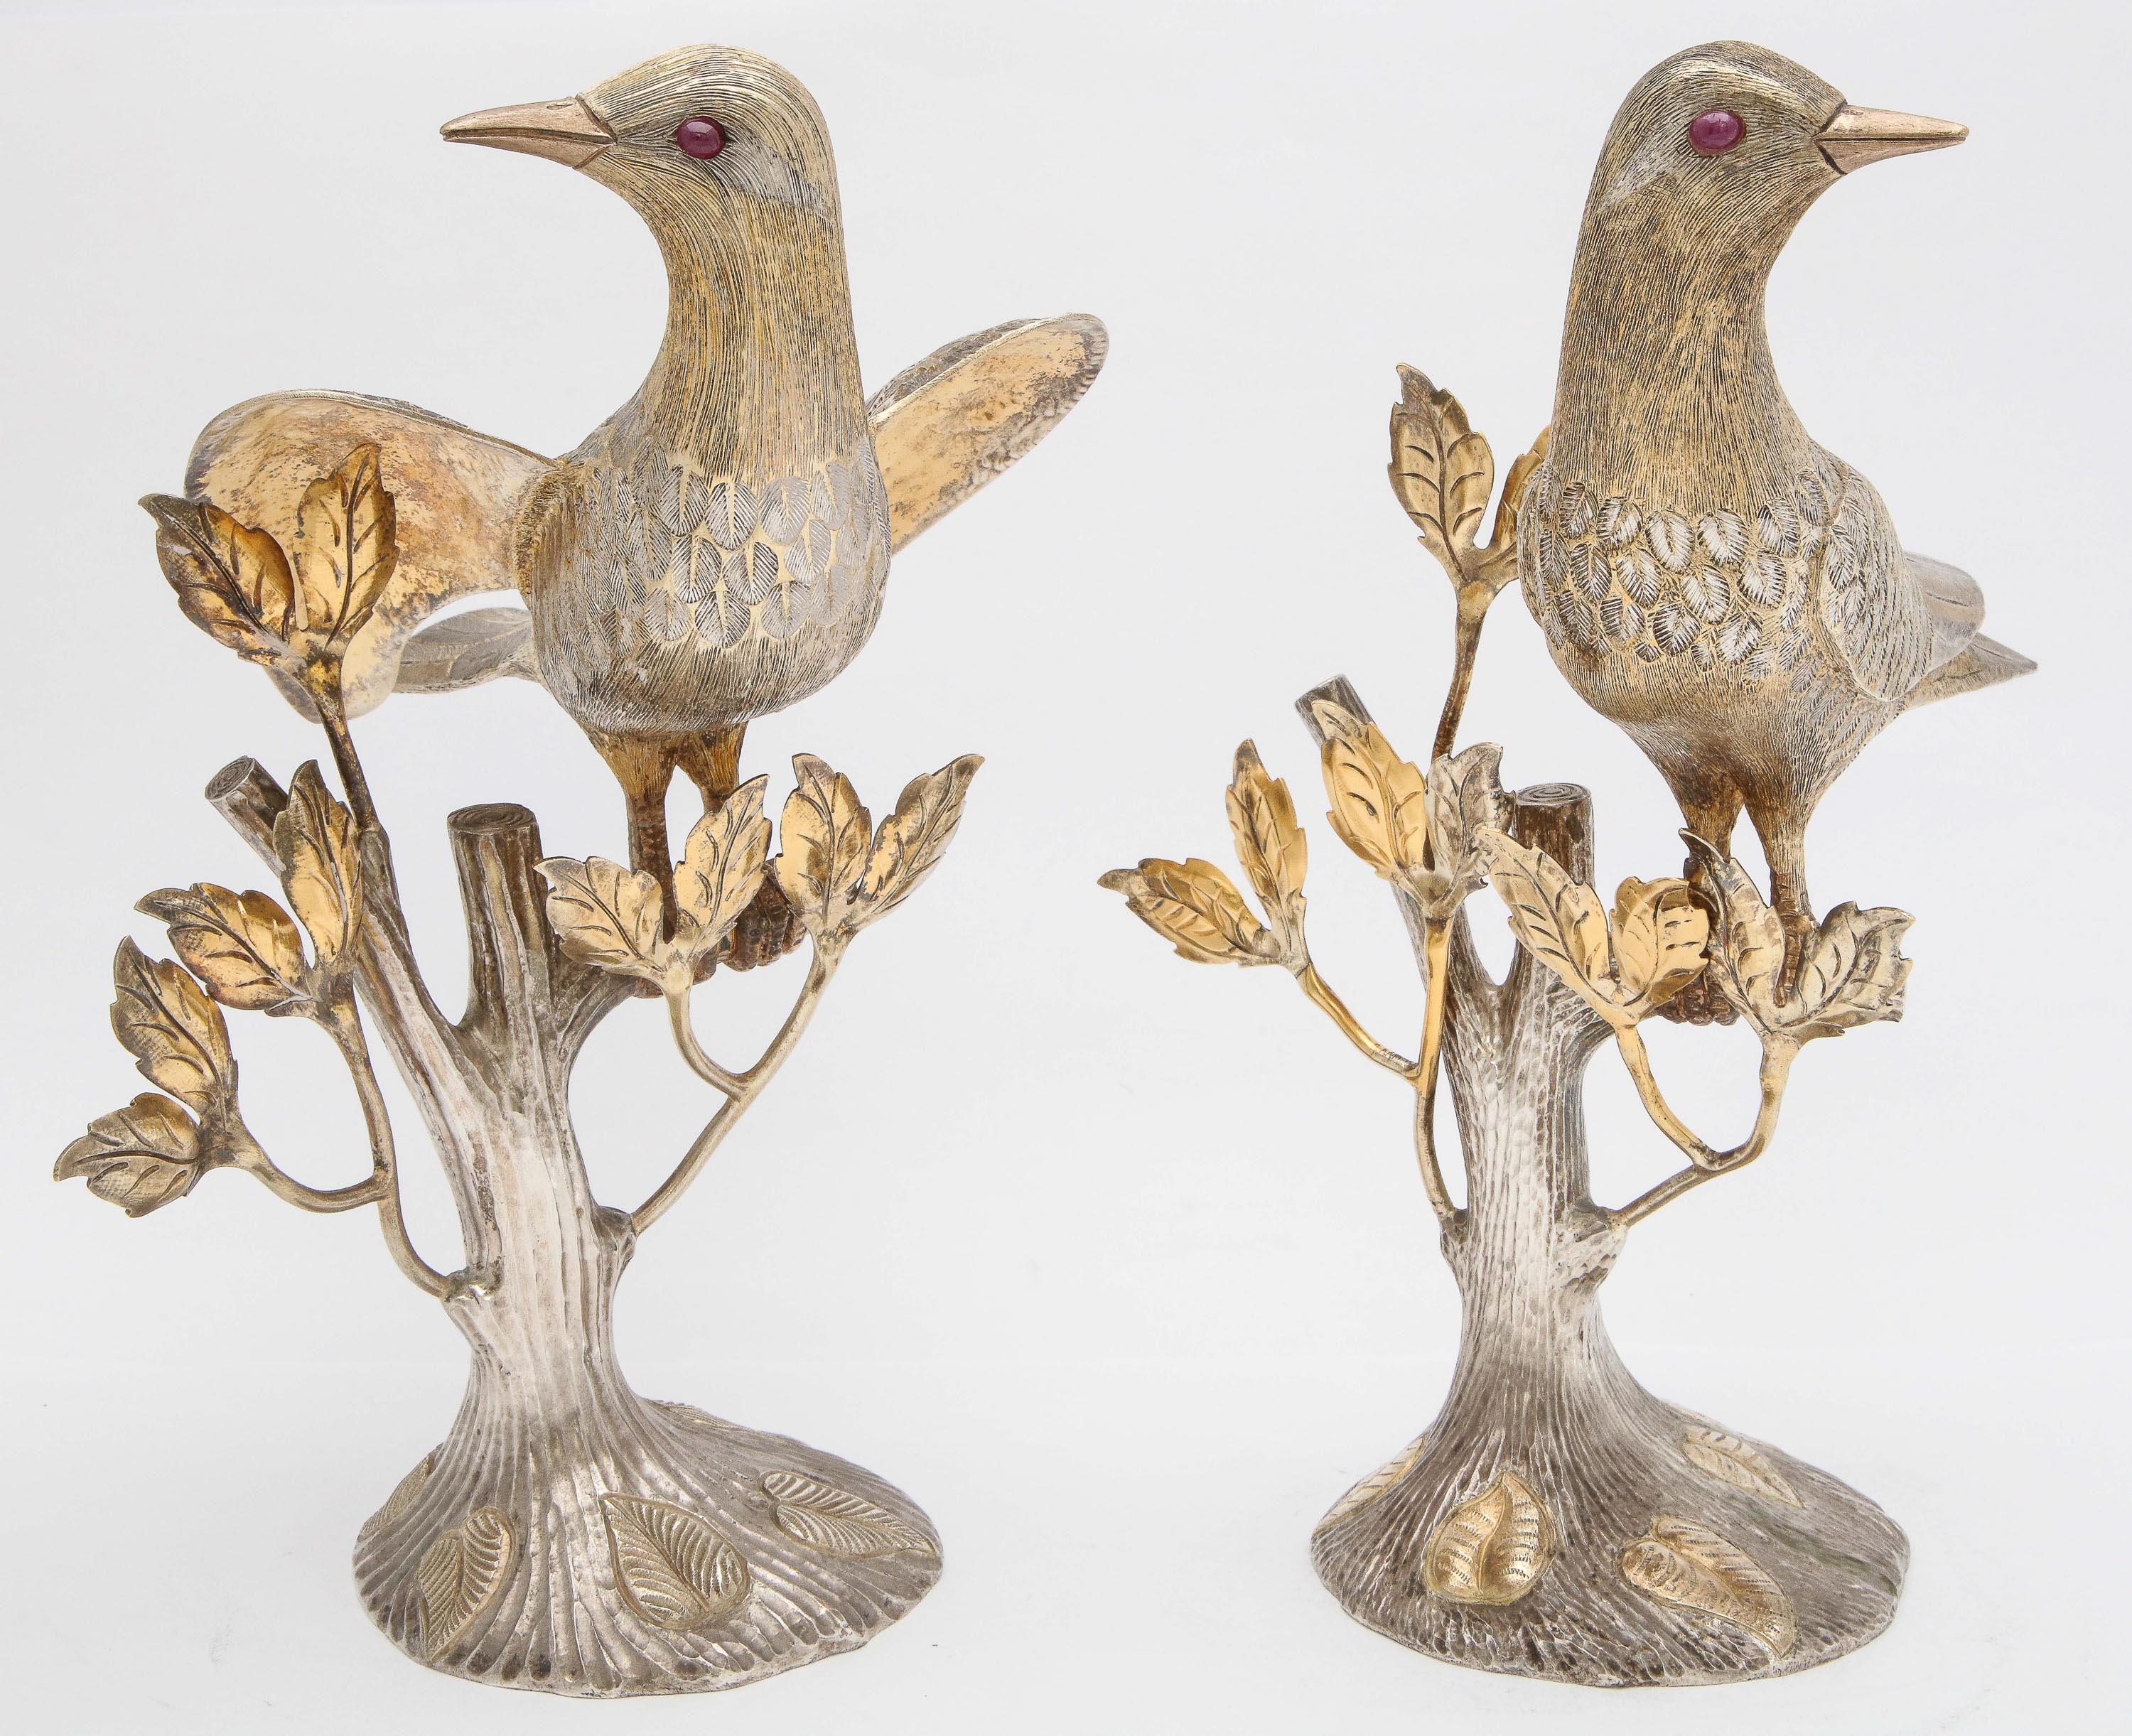 Midcentury Decorative Pair of Sterling Silver Table Birds by Tane 6